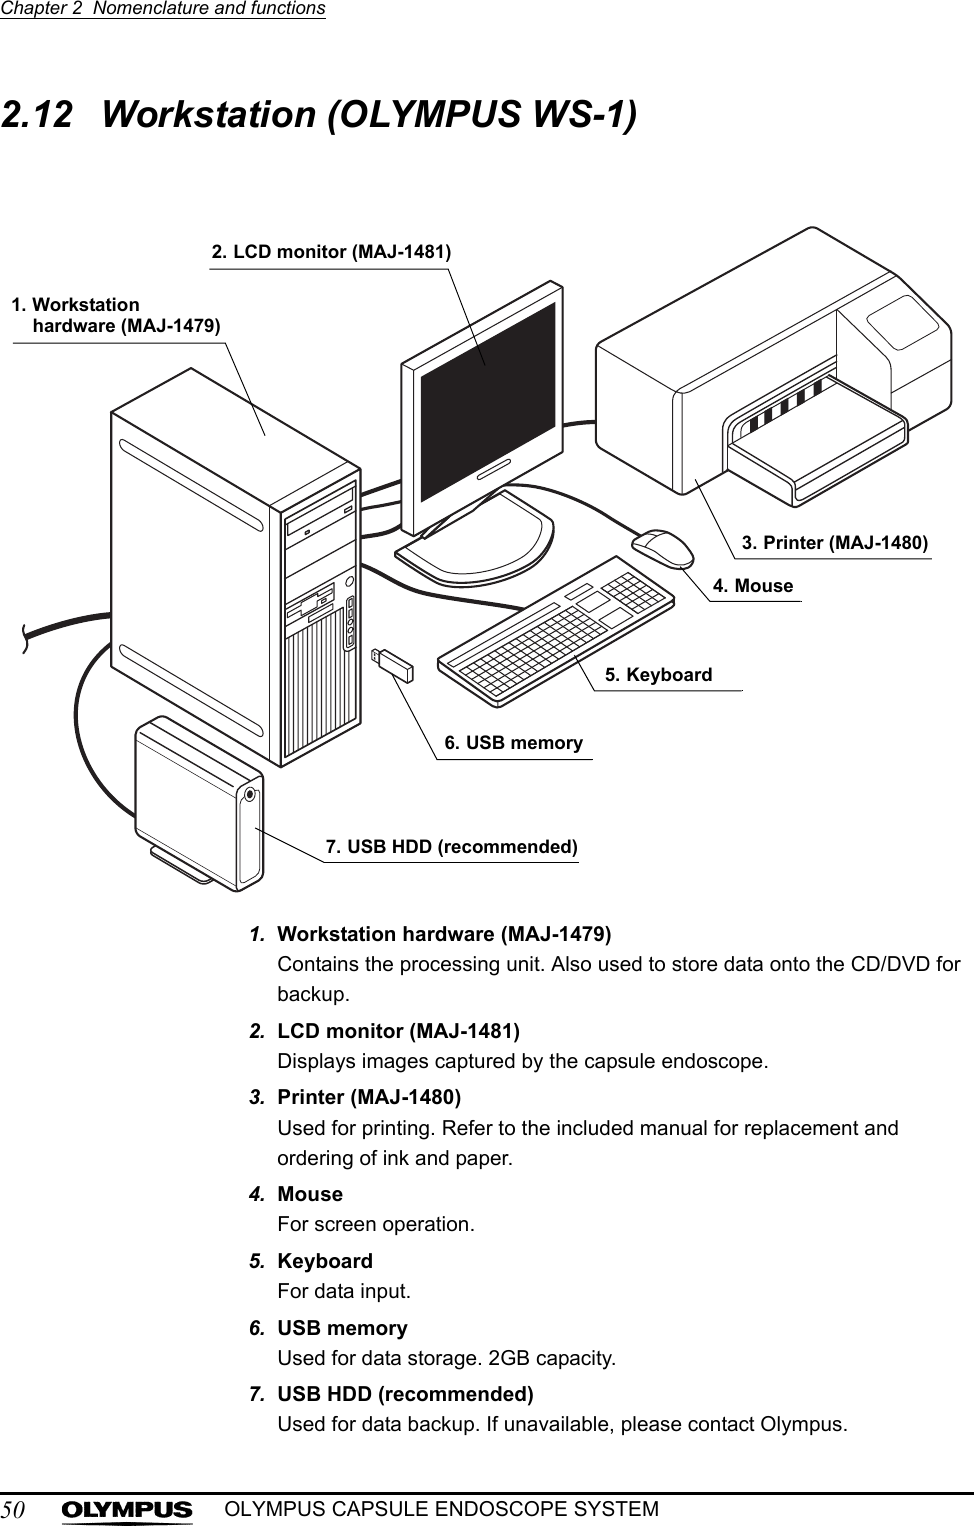 50Chapter 2  Nomenclature and functionsOLYMPUS CAPSULE ENDOSCOPE SYSTEM2.12 Workstation (OLYMPUS WS-1) 1. Workstation hardware (MAJ-1479)Contains the processing unit. Also used to store data onto the CD/DVD for backup.2. LCD monitor (MAJ-1481)Displays images captured by the capsule endoscope.3. Printer (MAJ-1480)Used for printing. Refer to the included manual for replacement and ordering of ink and paper.4. MouseFor screen operation.5. KeyboardFor data input.6. USB memoryUsed for data storage. 2GB capacity.7. USB HDD (recommended)Used for data backup. If unavailable, please contact Olympus.1. Workstation hardware (MAJ-1479)5. Keyboard4. Mouse3. Printer (MAJ-1480)2. LCD monitor (MAJ-1481)6. USB memory7. USB HDD (recommended)